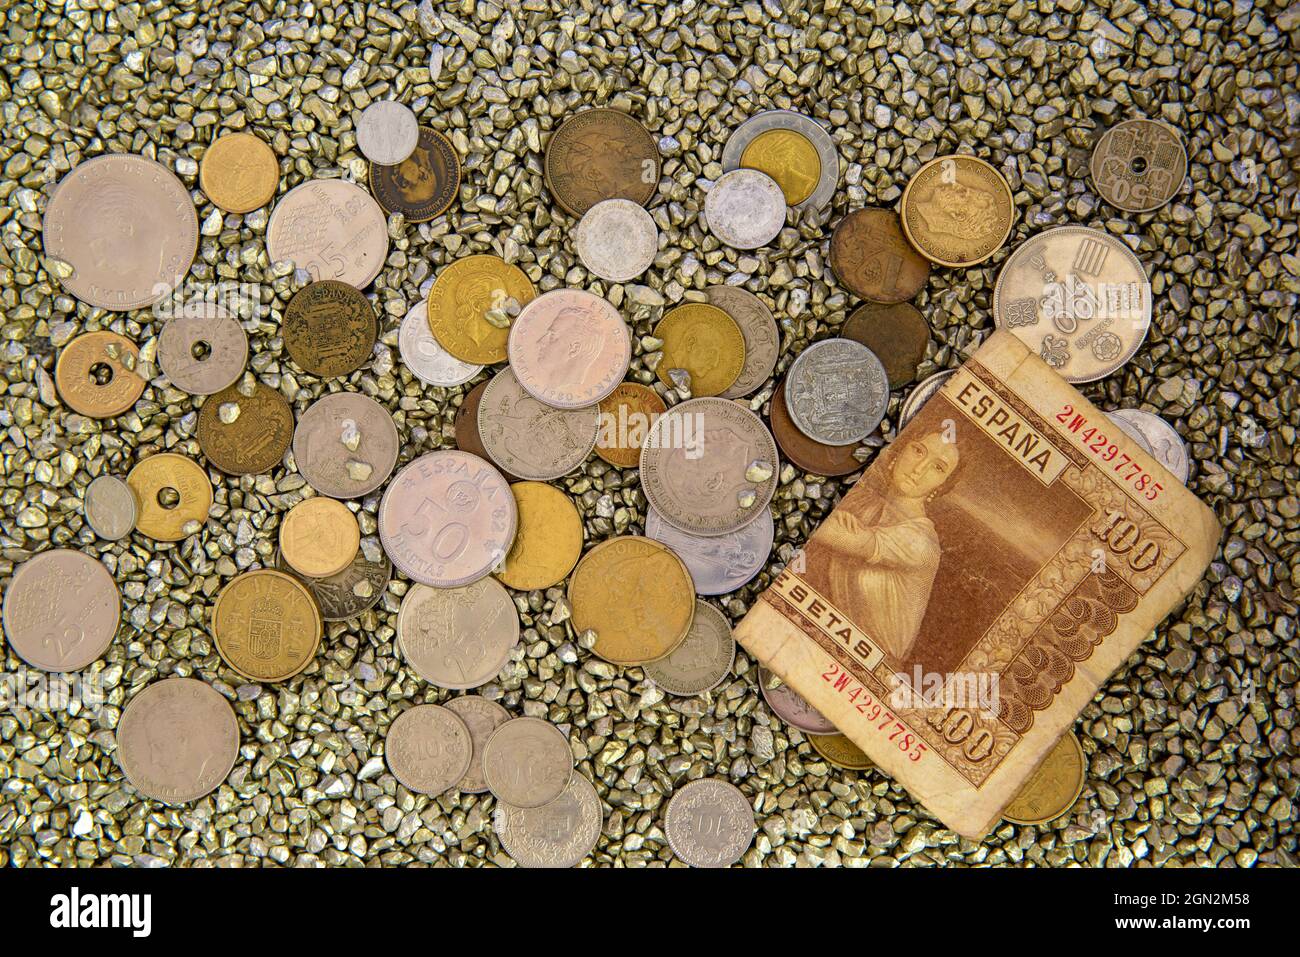 Coins and banknotes of old Spanish currency Peseta Stock Photo